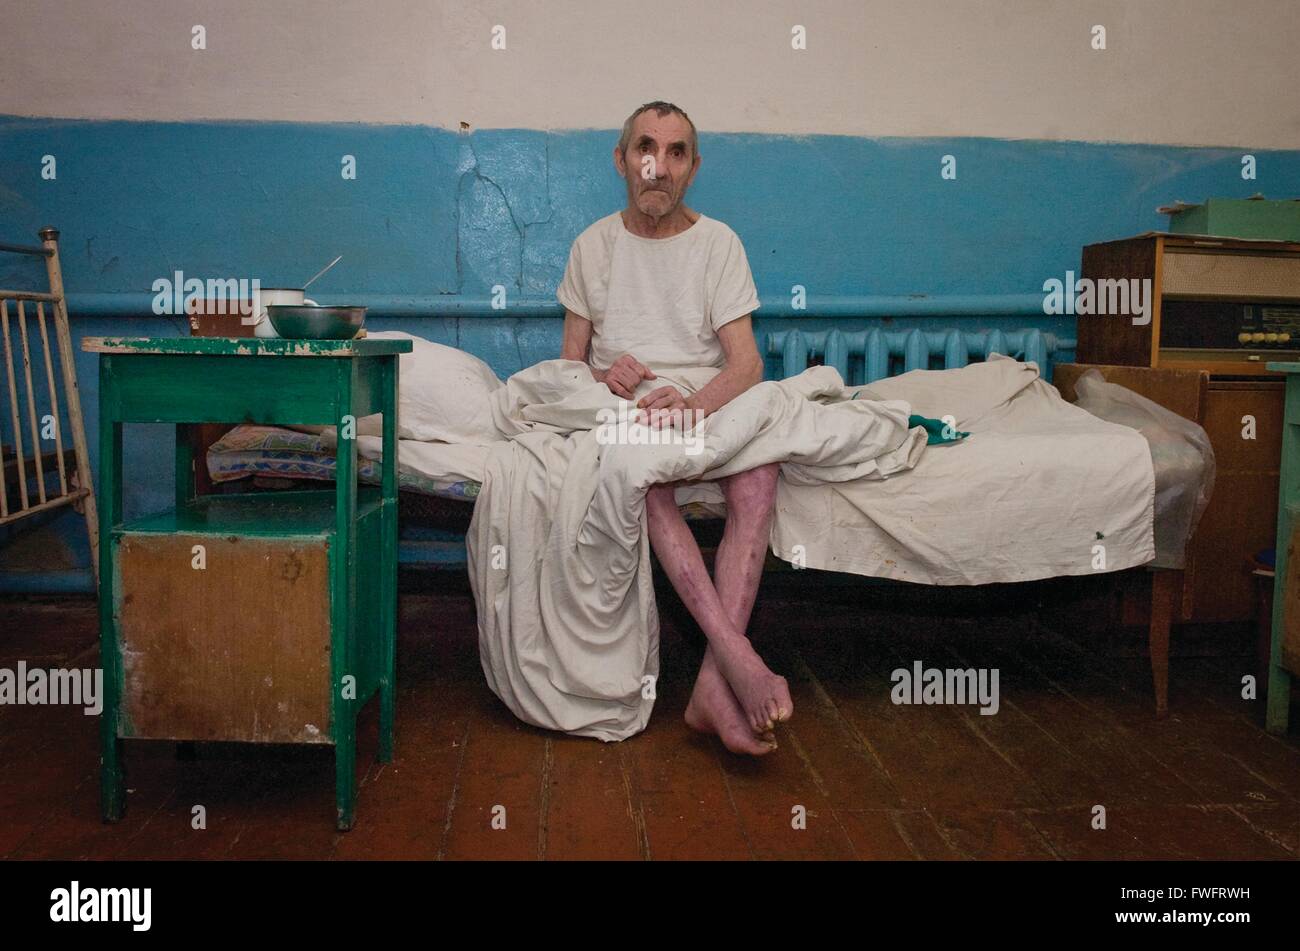 Didivschyna, Ukraine. An elderly resident of a government care home sits on his bed wearing a white shirt. The care home is run down and shabby and waiting for refurbishment by British Charity, International Aid Trust,based in Much Hoole, Preston, Lancashire Stock Photo